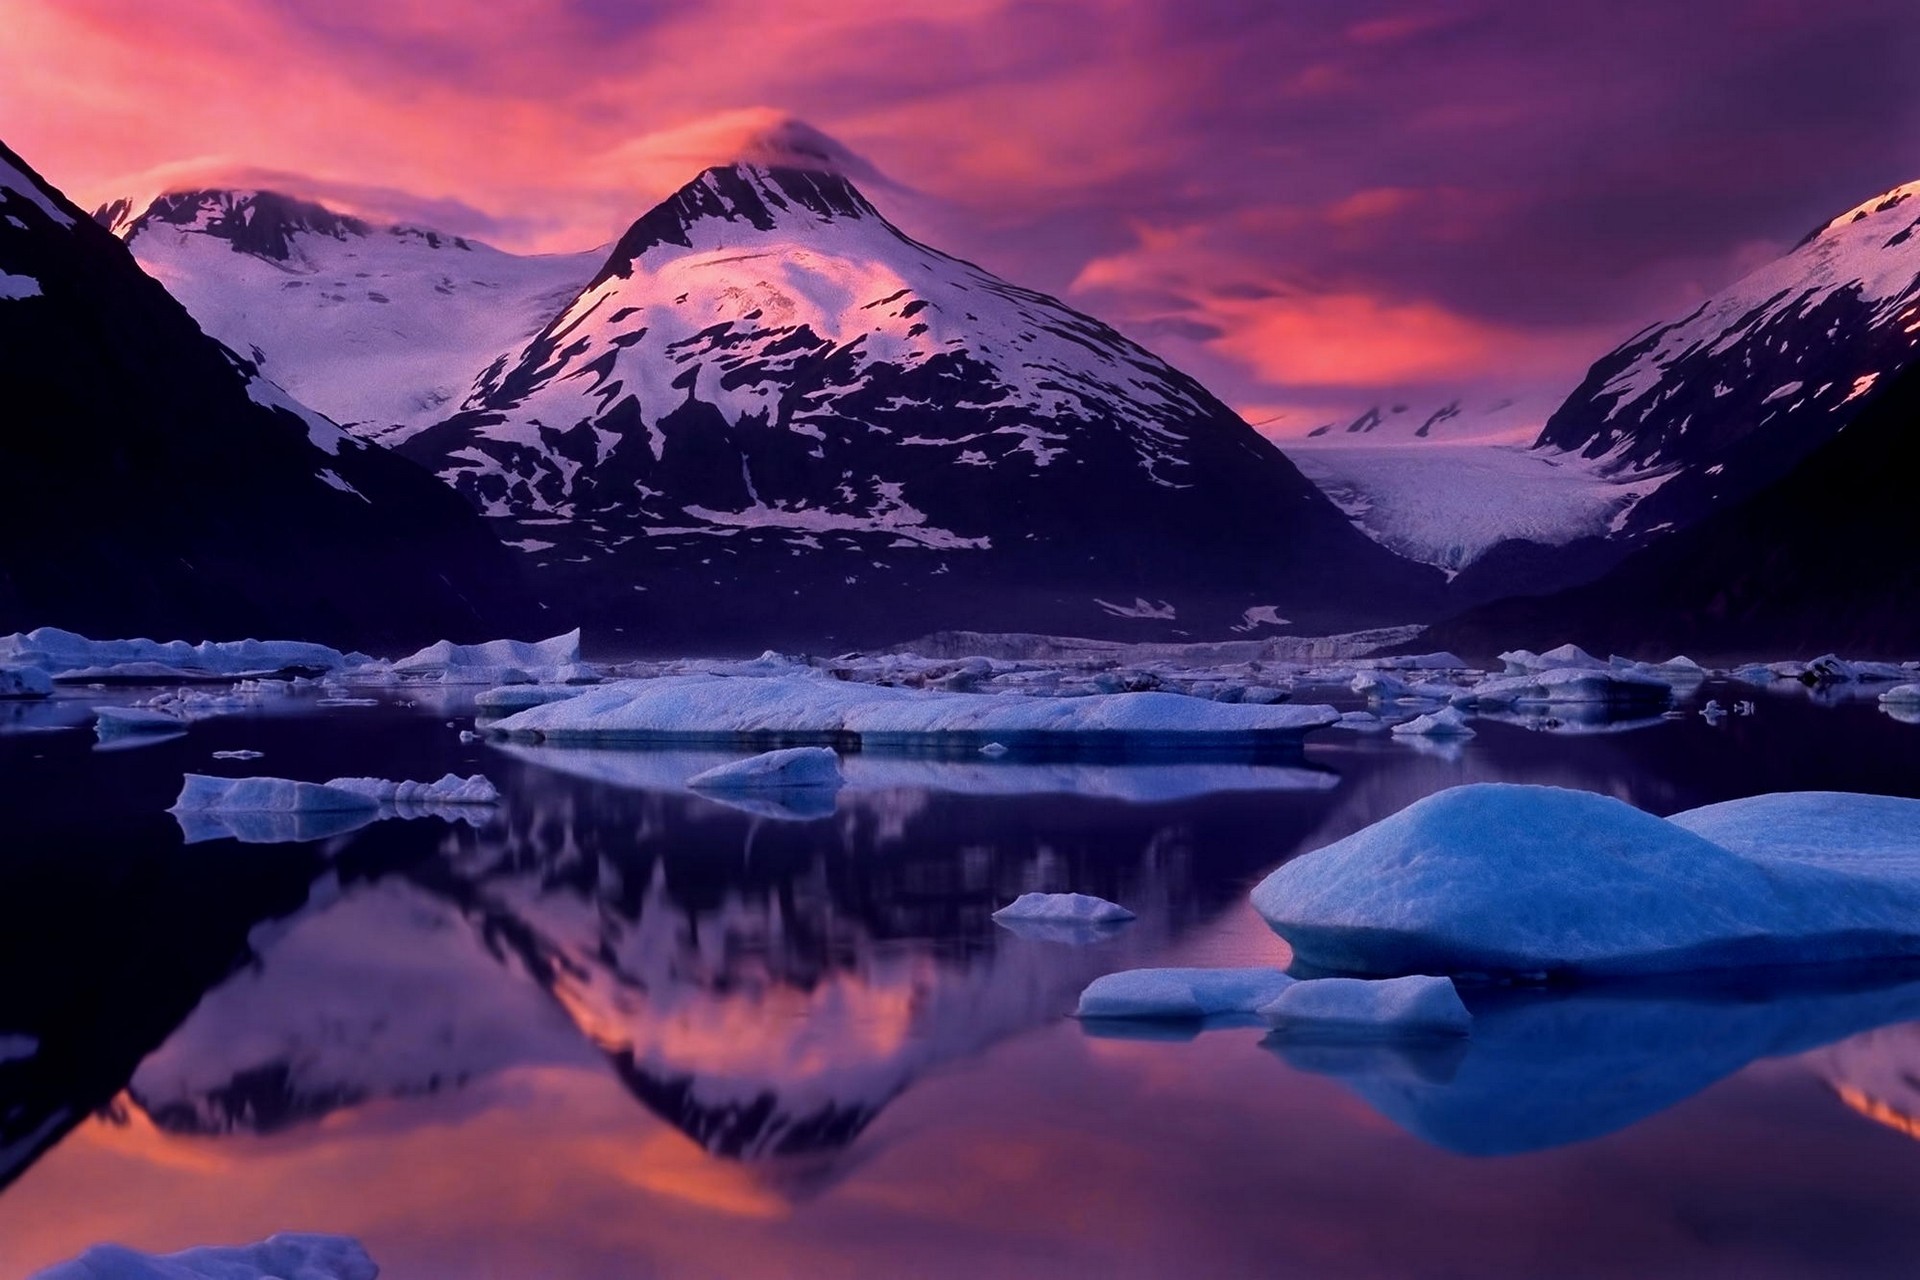 Glaciers Cold Mountains Sunset Nature Alaska Snowy Peak Reflection Landscape Sky Ice Water Clouds Wi 1920x1280